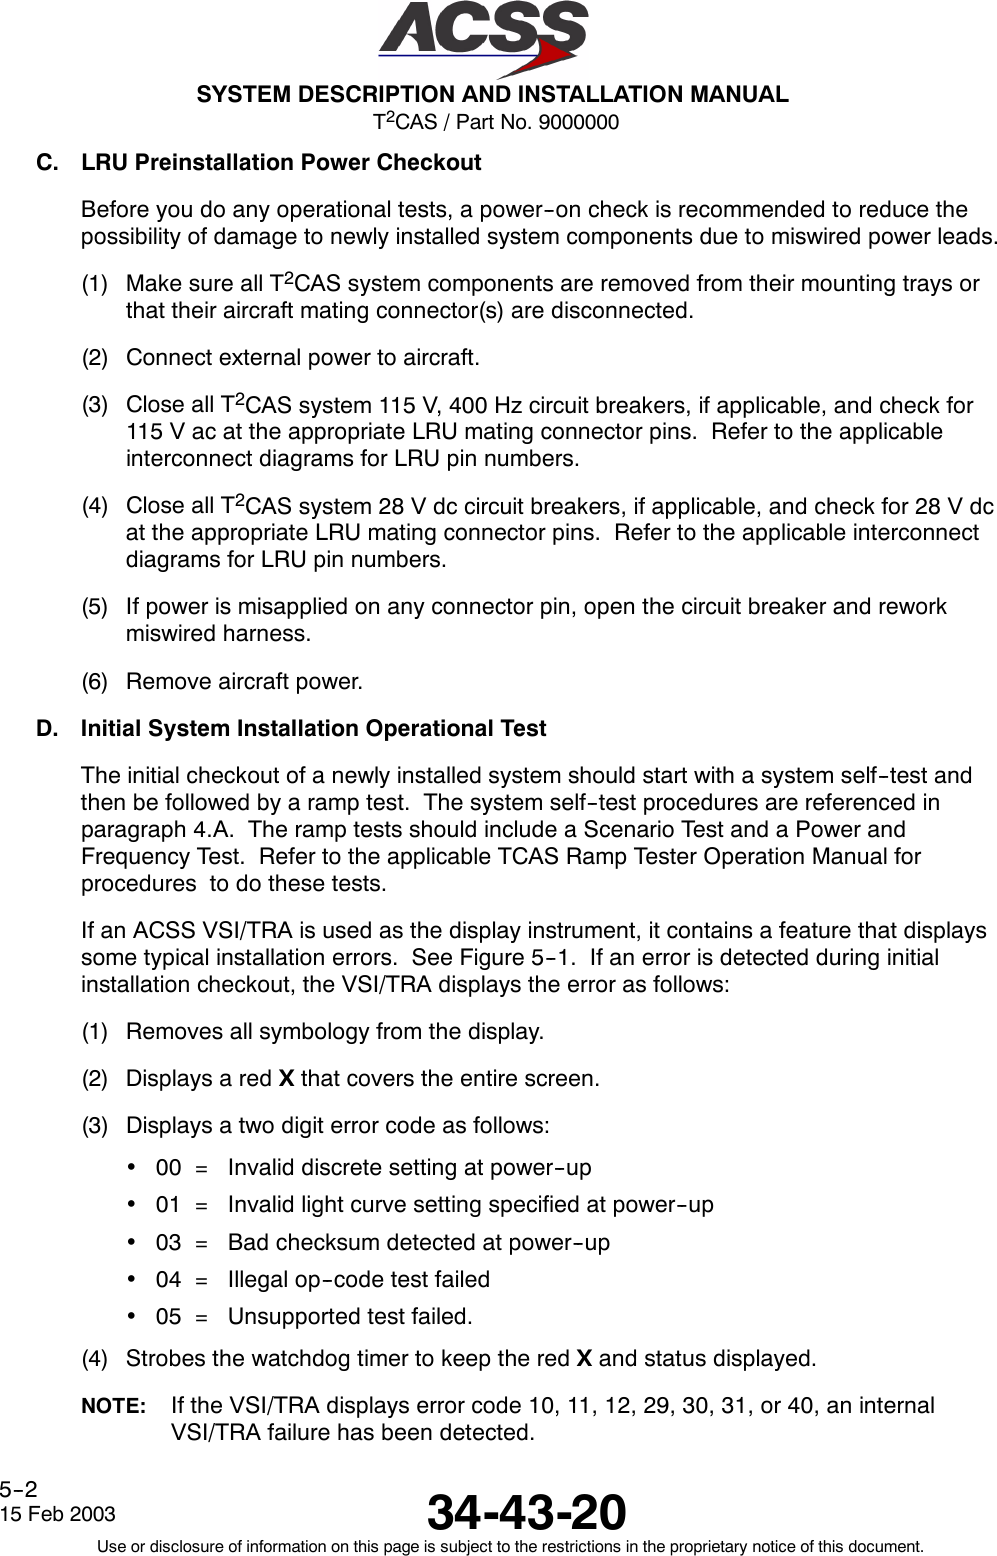 T2CAS / Part No. 9000000SYSTEM DESCRIPTION AND INSTALLATION MANUAL34-43-2015 Feb 2003Use or disclosure of information on this page is subject to the restrictions in the proprietary notice of this document.5--2C. LRU Preinstallation Power CheckoutBefore you do any operational tests, a power--on check is recommended to reduce thepossibility of damage to newly installed system components due to miswired power leads.(1) Make sure all T2CAS system components are removed from their mounting trays orthat their aircraft mating connector(s) are disconnected.(2) Connect external power to aircraft.(3) Close all T2CAS system 115 V, 400 Hz circuit breakers, if applicable, and check for115 V ac at the appropriate LRU mating connector pins. Refer to the applicableinterconnect diagrams for LRU pin numbers.(4) Close all T2CAS system 28 V dc circuit breakers, if applicable, and check for 28 V dcat the appropriate LRU mating connector pins. Refer to the applicable interconnectdiagrams for LRU pin numbers.(5) If power is misapplied on any connector pin, open the circuit breaker and reworkmiswired harness.(6) Remove aircraft power.D. Initial System Installation Operational TestThe initial checkout of a newly installed system should start with a system self--test andthen be followed by a ramp test. The system self--test procedures are referenced inparagraph 4.A. The ramp tests should include a Scenario Test and a Power andFrequency Test. Refer to the applicable TCAS Ramp Tester Operation Manual forprocedures to do these tests.If an ACSS VSI/TRA is used as the display instrument, it contains a feature that displayssome typical installation errors. See Figure 5--1. If an error is detected during initialinstallation checkout, the VSI/TRA displays the error as follows:(1) Removes all symbology from the display.(2) Displays a red Xthat covers the entire screen.(3) Displays a two digit error code as follows:•00 = Invalid discrete setting at power--up•01 = Invalid light curve setting specified at power--up•03 = Bad checksum detected at power--up•04 = Illegal op--code test failed•05 = Unsupported test failed.(4) Strobes the watchdog timer to keep the red Xand status displayed.NOTE: If the VSI/TRA displays error code 10, 11, 12, 29, 30, 31, or 40, an internalVSI/TRA failure has been detected.